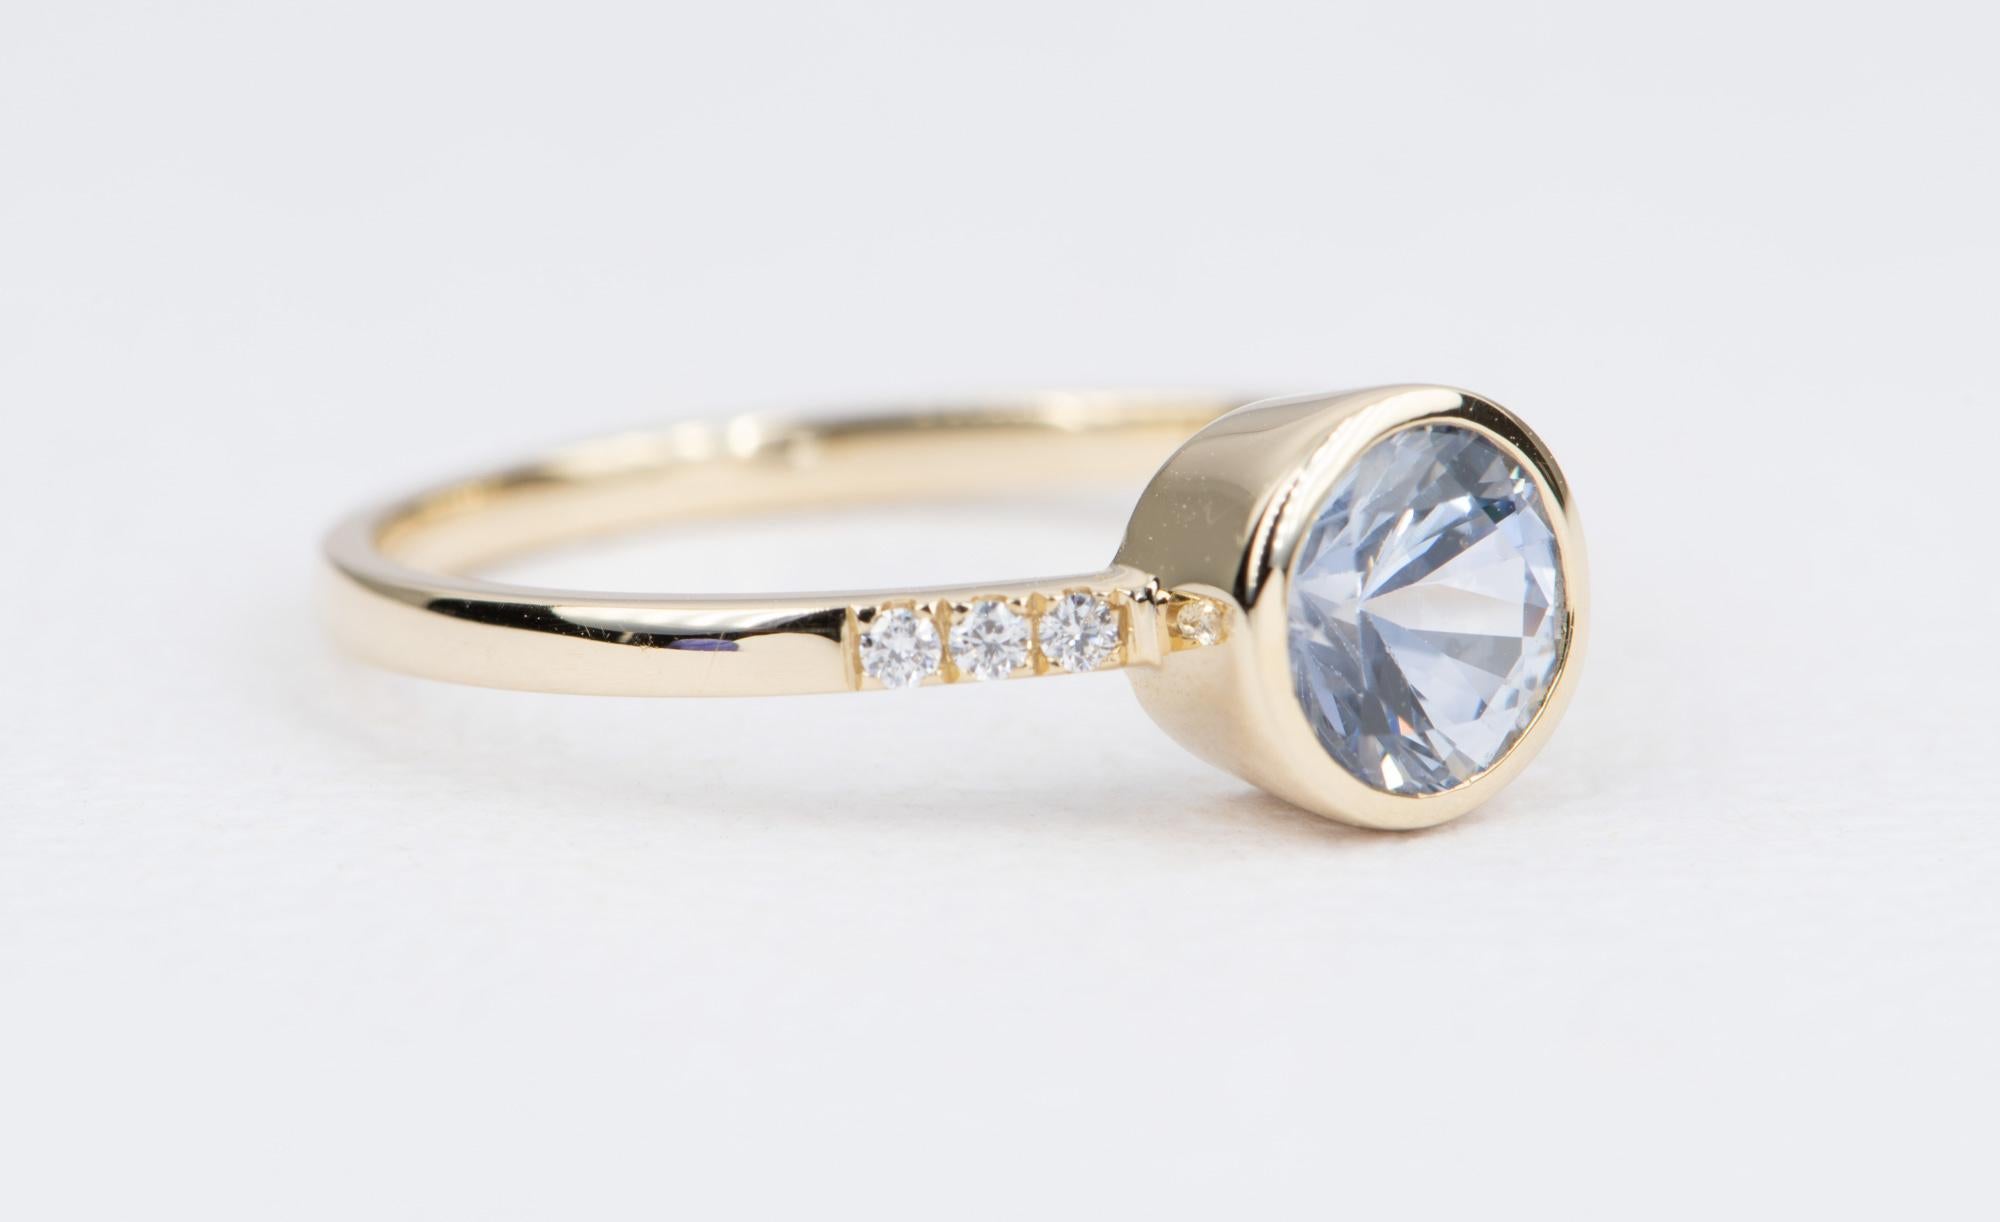 ♥  Classic 14K yellow gold ring featuring a round Montana sapphire bezel set in the center, with a trio of colorless diamonds pave set on each side of the band

♥  Ring size: US Size 6.5 (Free resizing)
♥  Ring width: 1.6mm 
♥  Gemstone: Montana